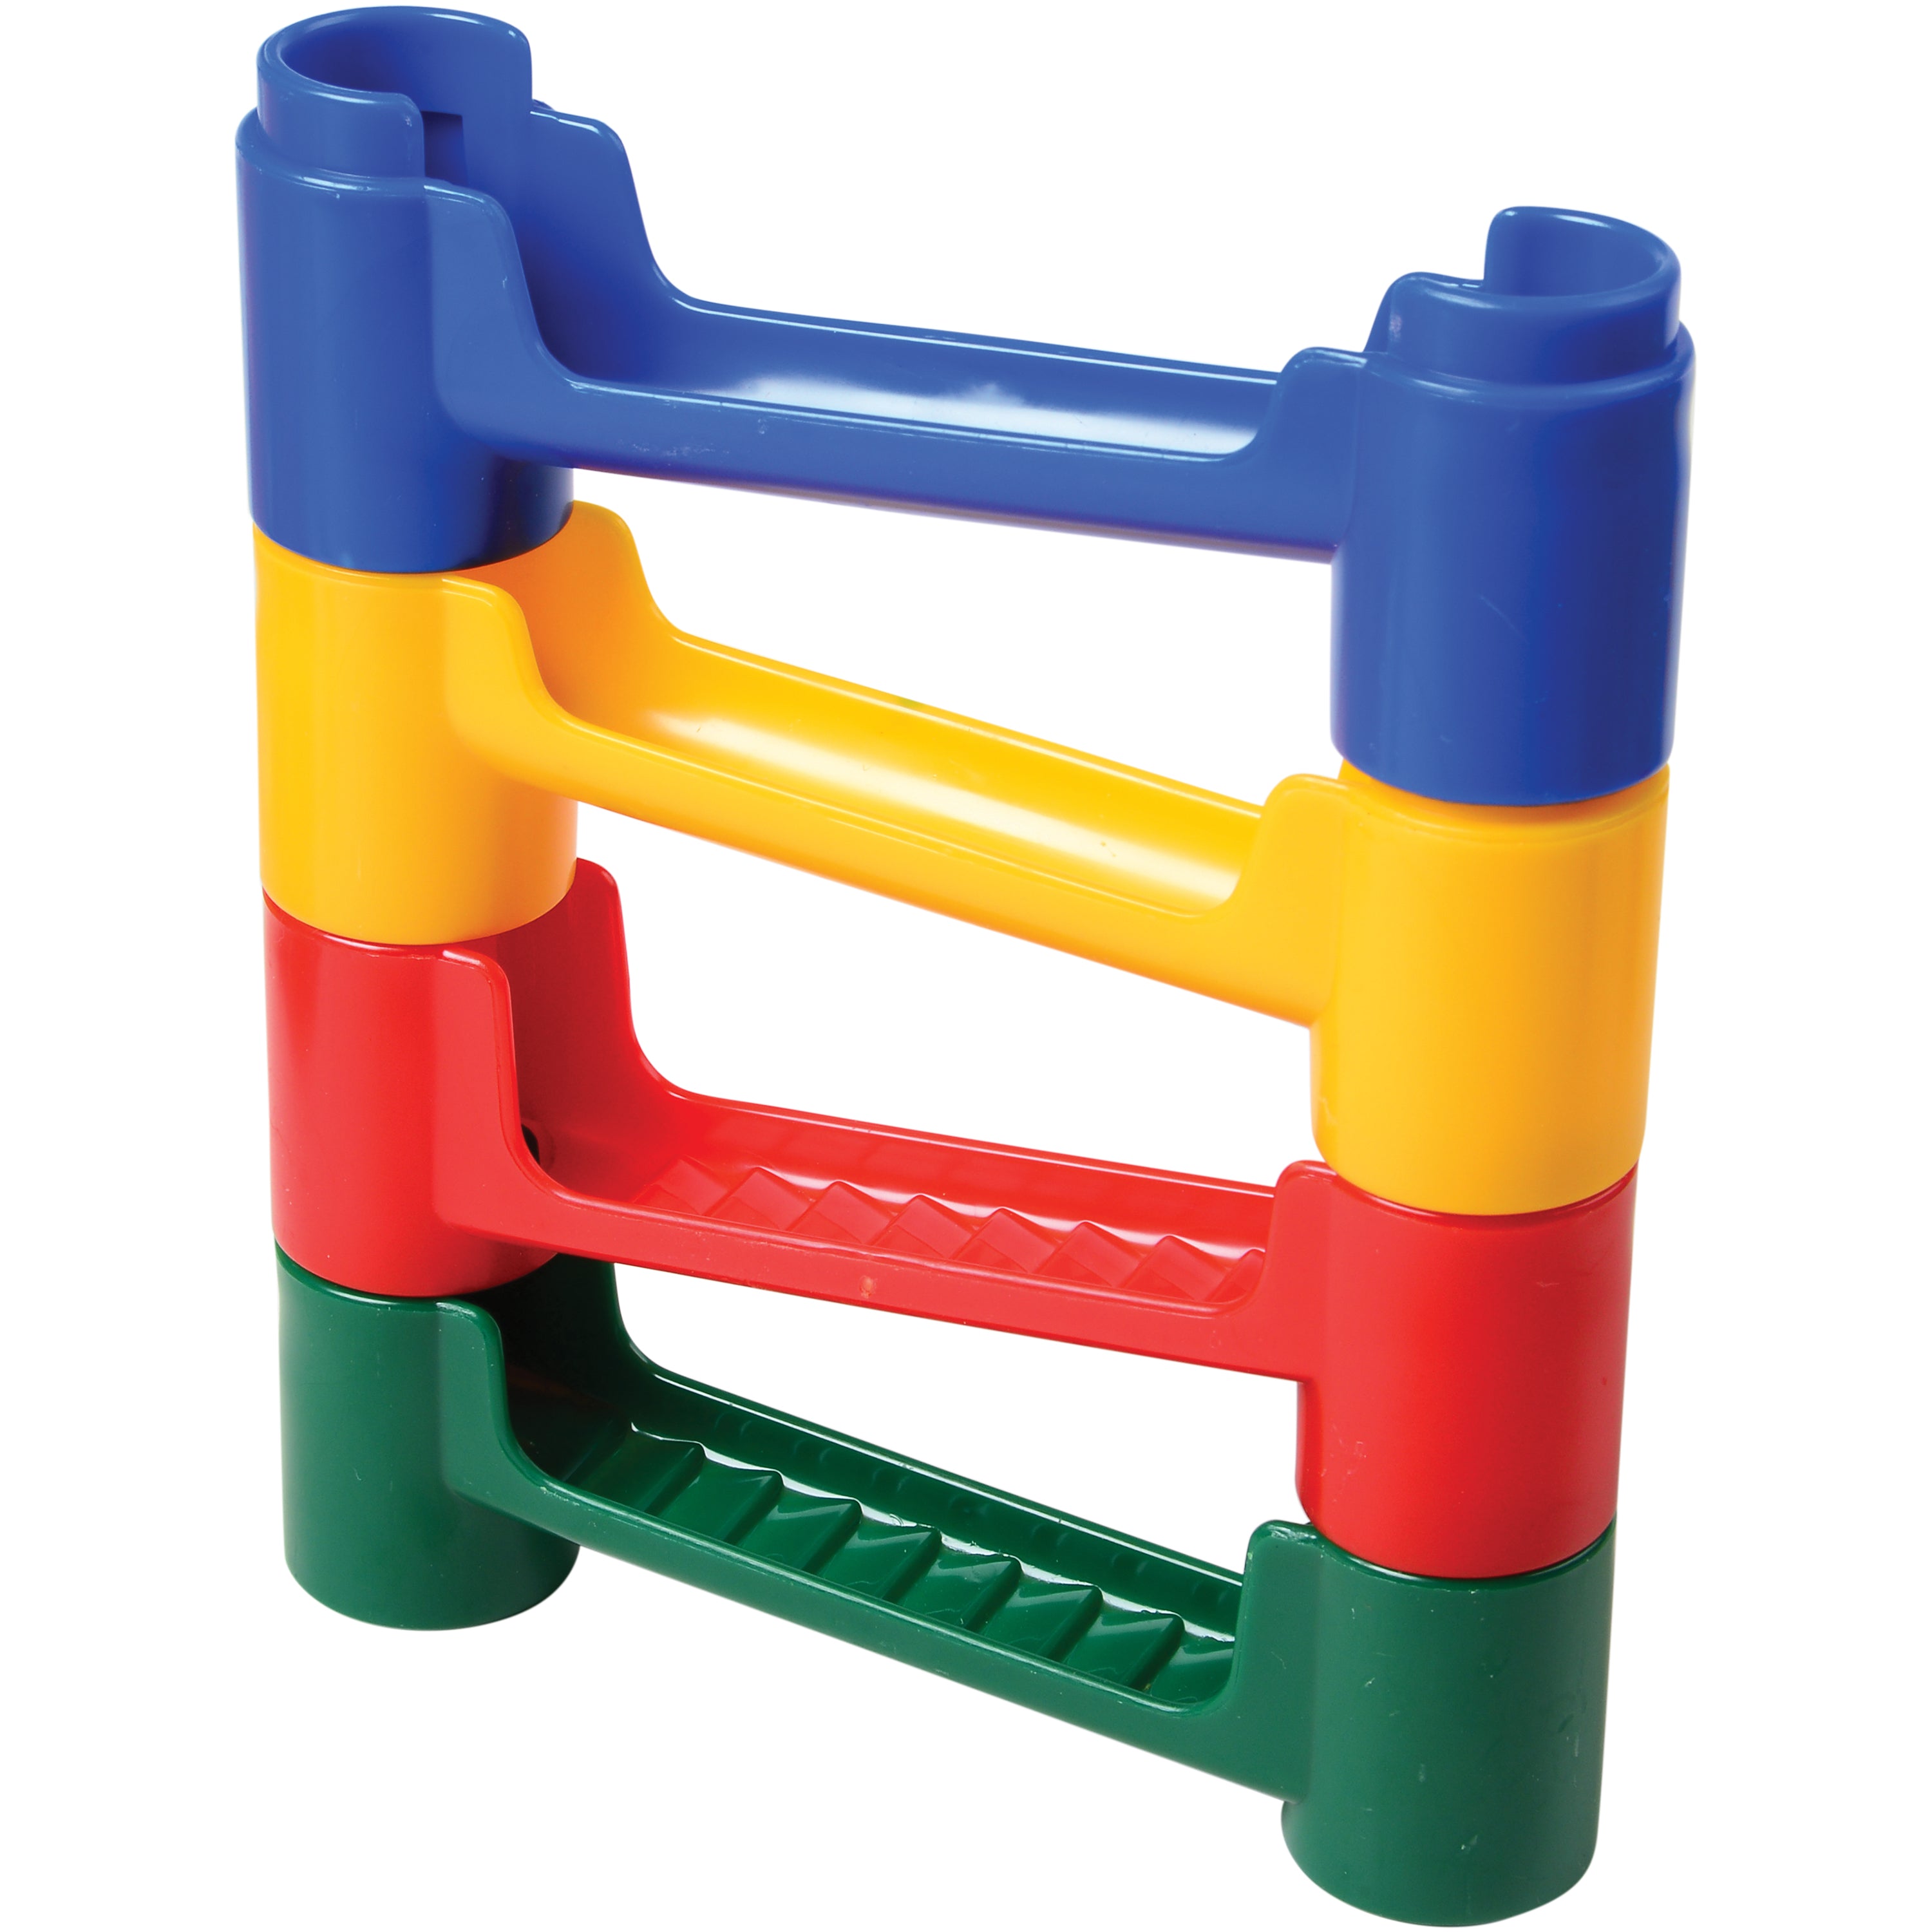 Marble Run Components